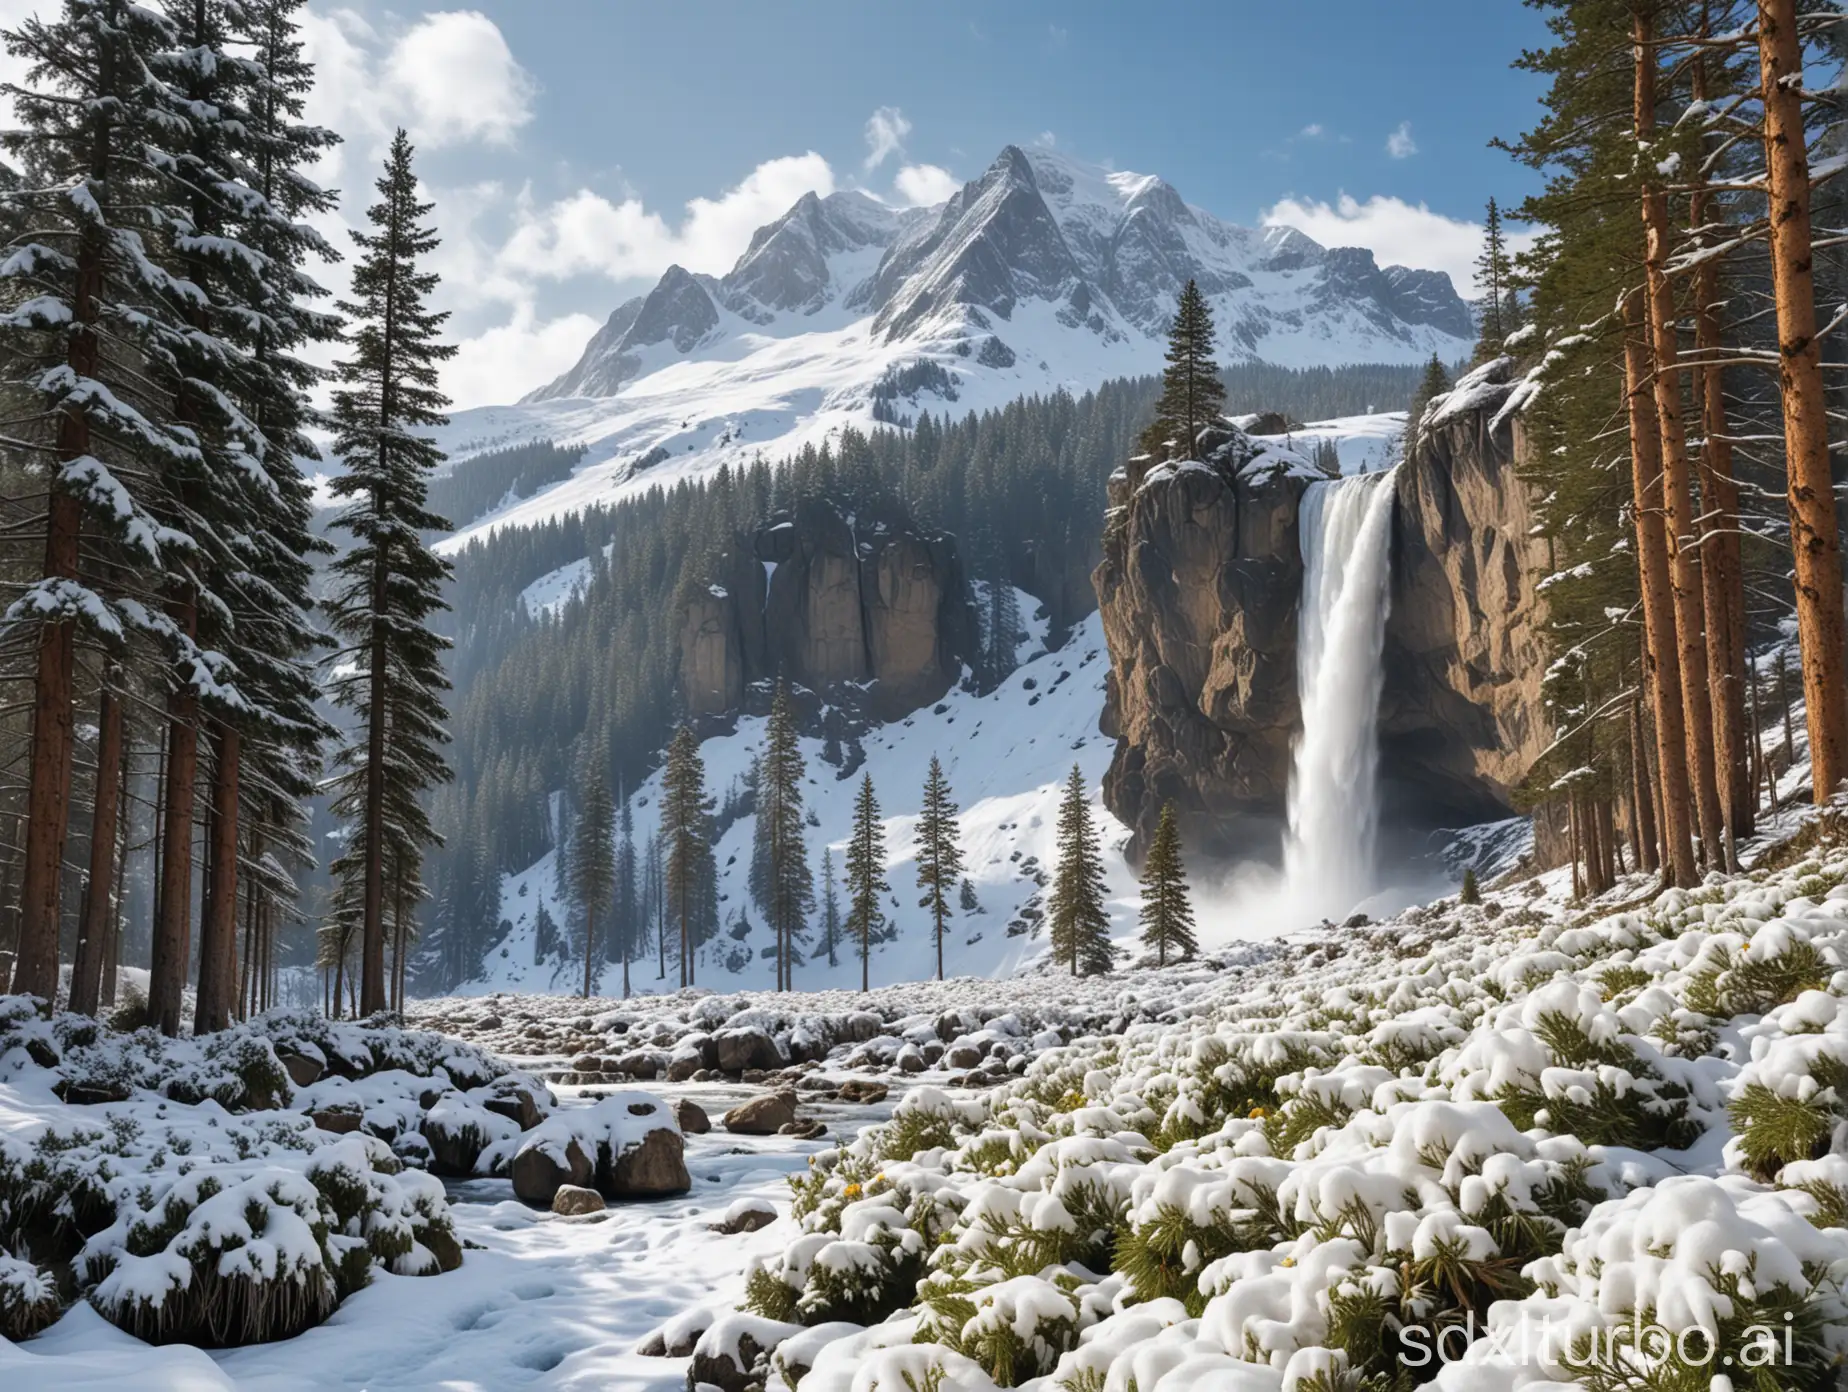 Open-air landscape, incredible waterfall, immense snow-covered mountain in the distance, some pine trees, landscape with some flowers